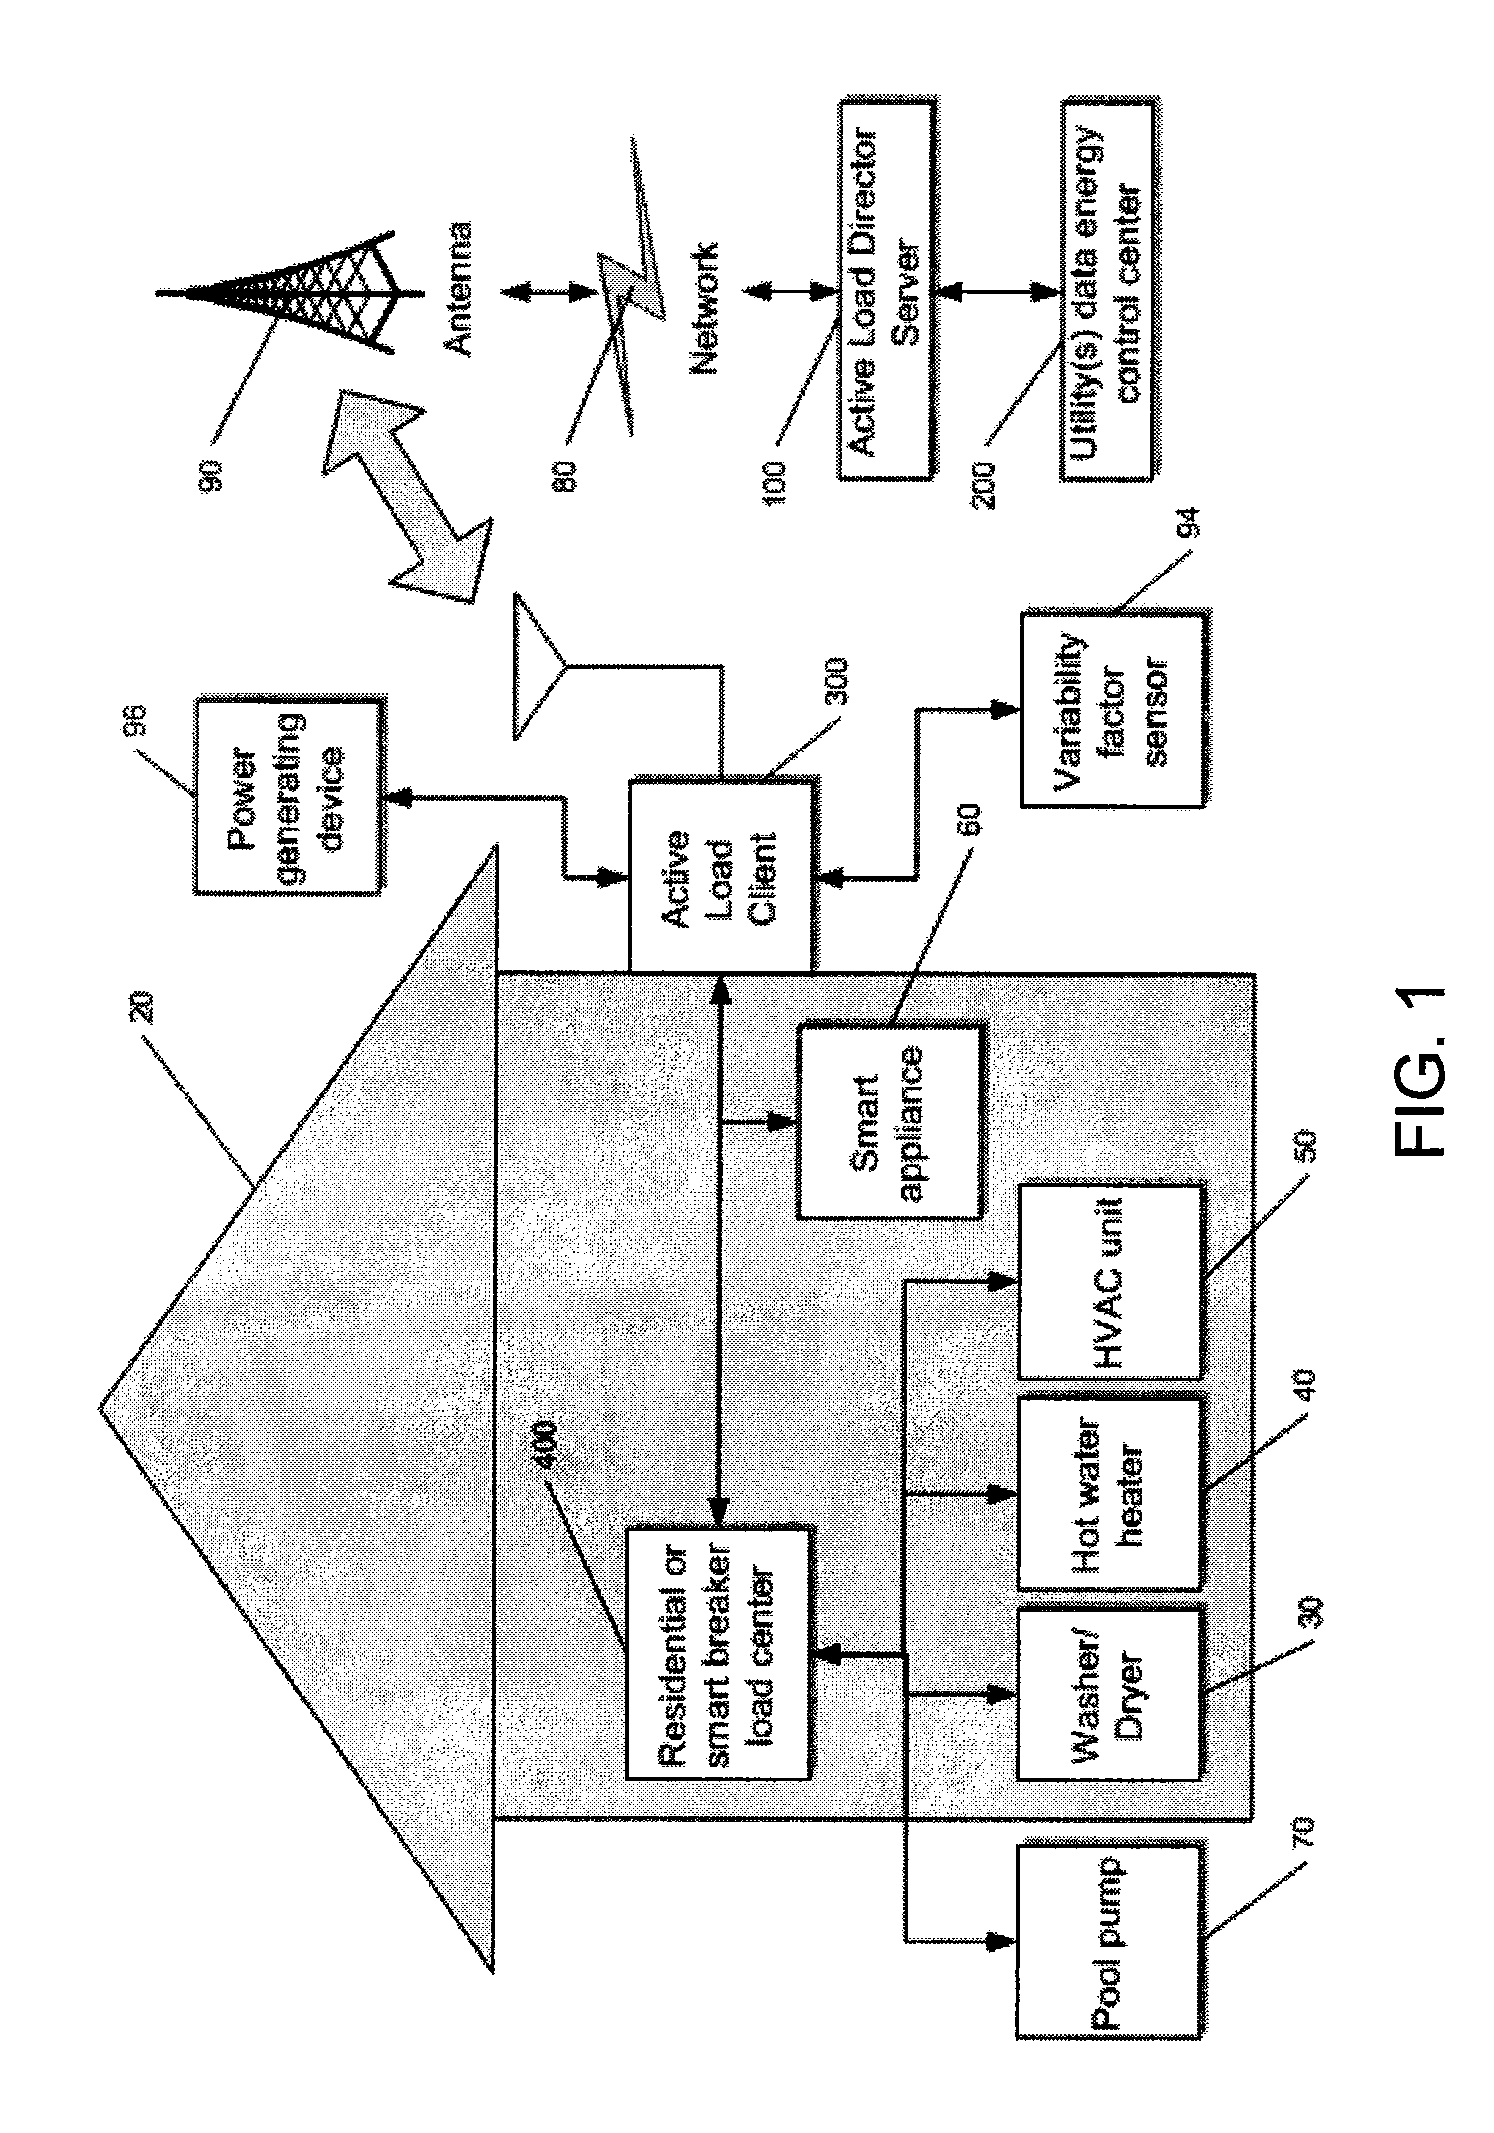 System and method for priority delivery of load management messages on ip-based networks